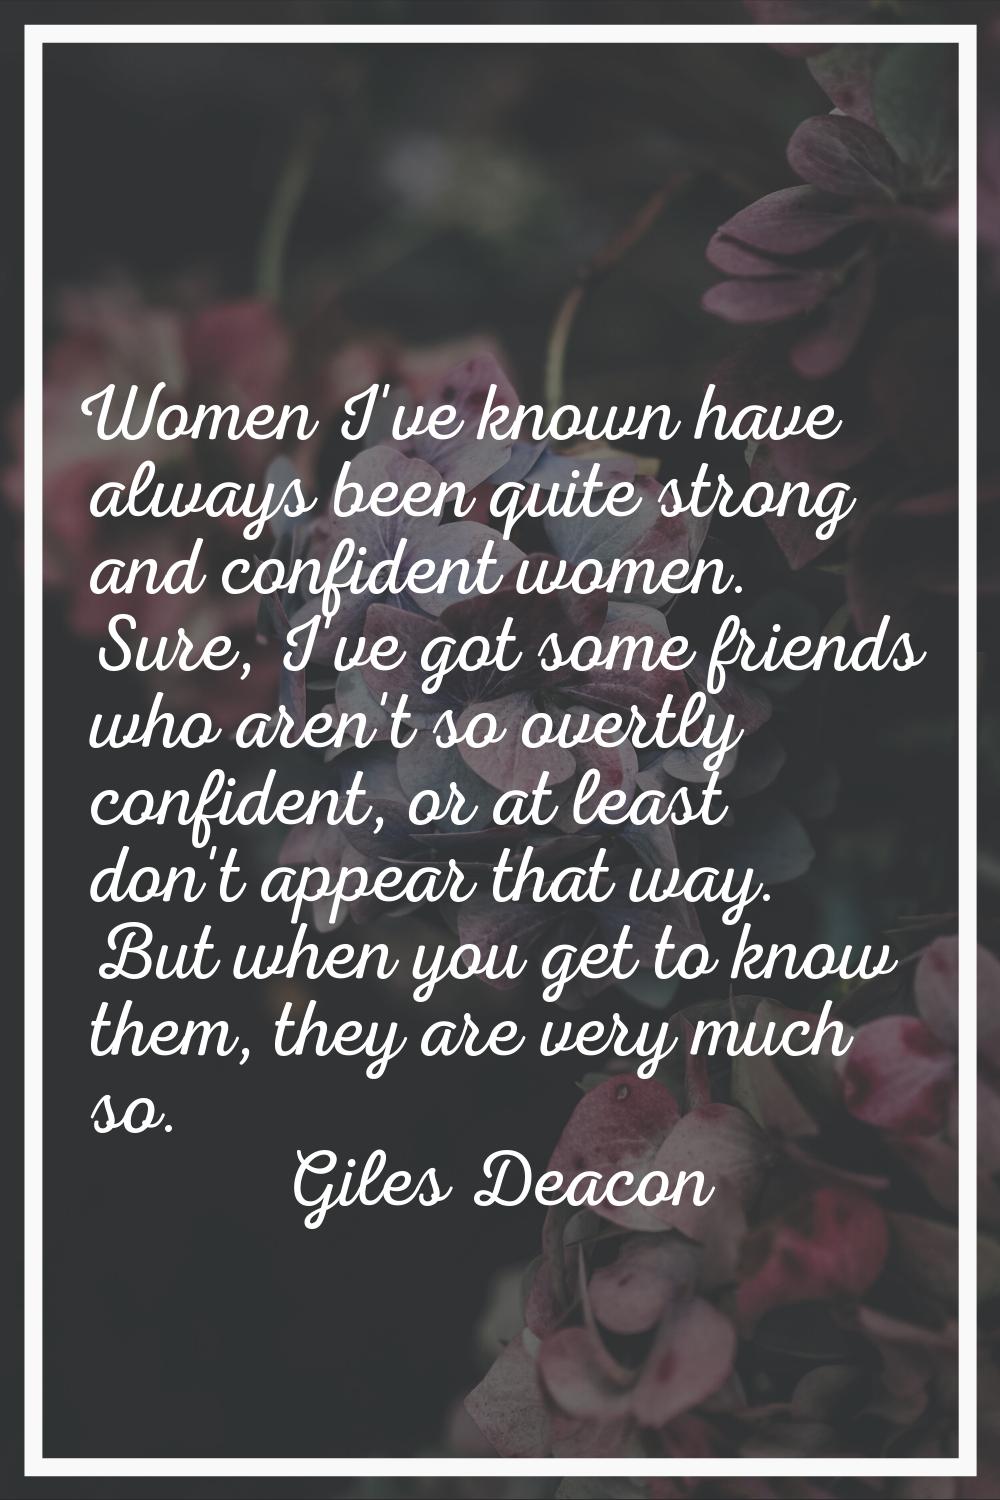 Women I've known have always been quite strong and confident women. Sure, I've got some friends who